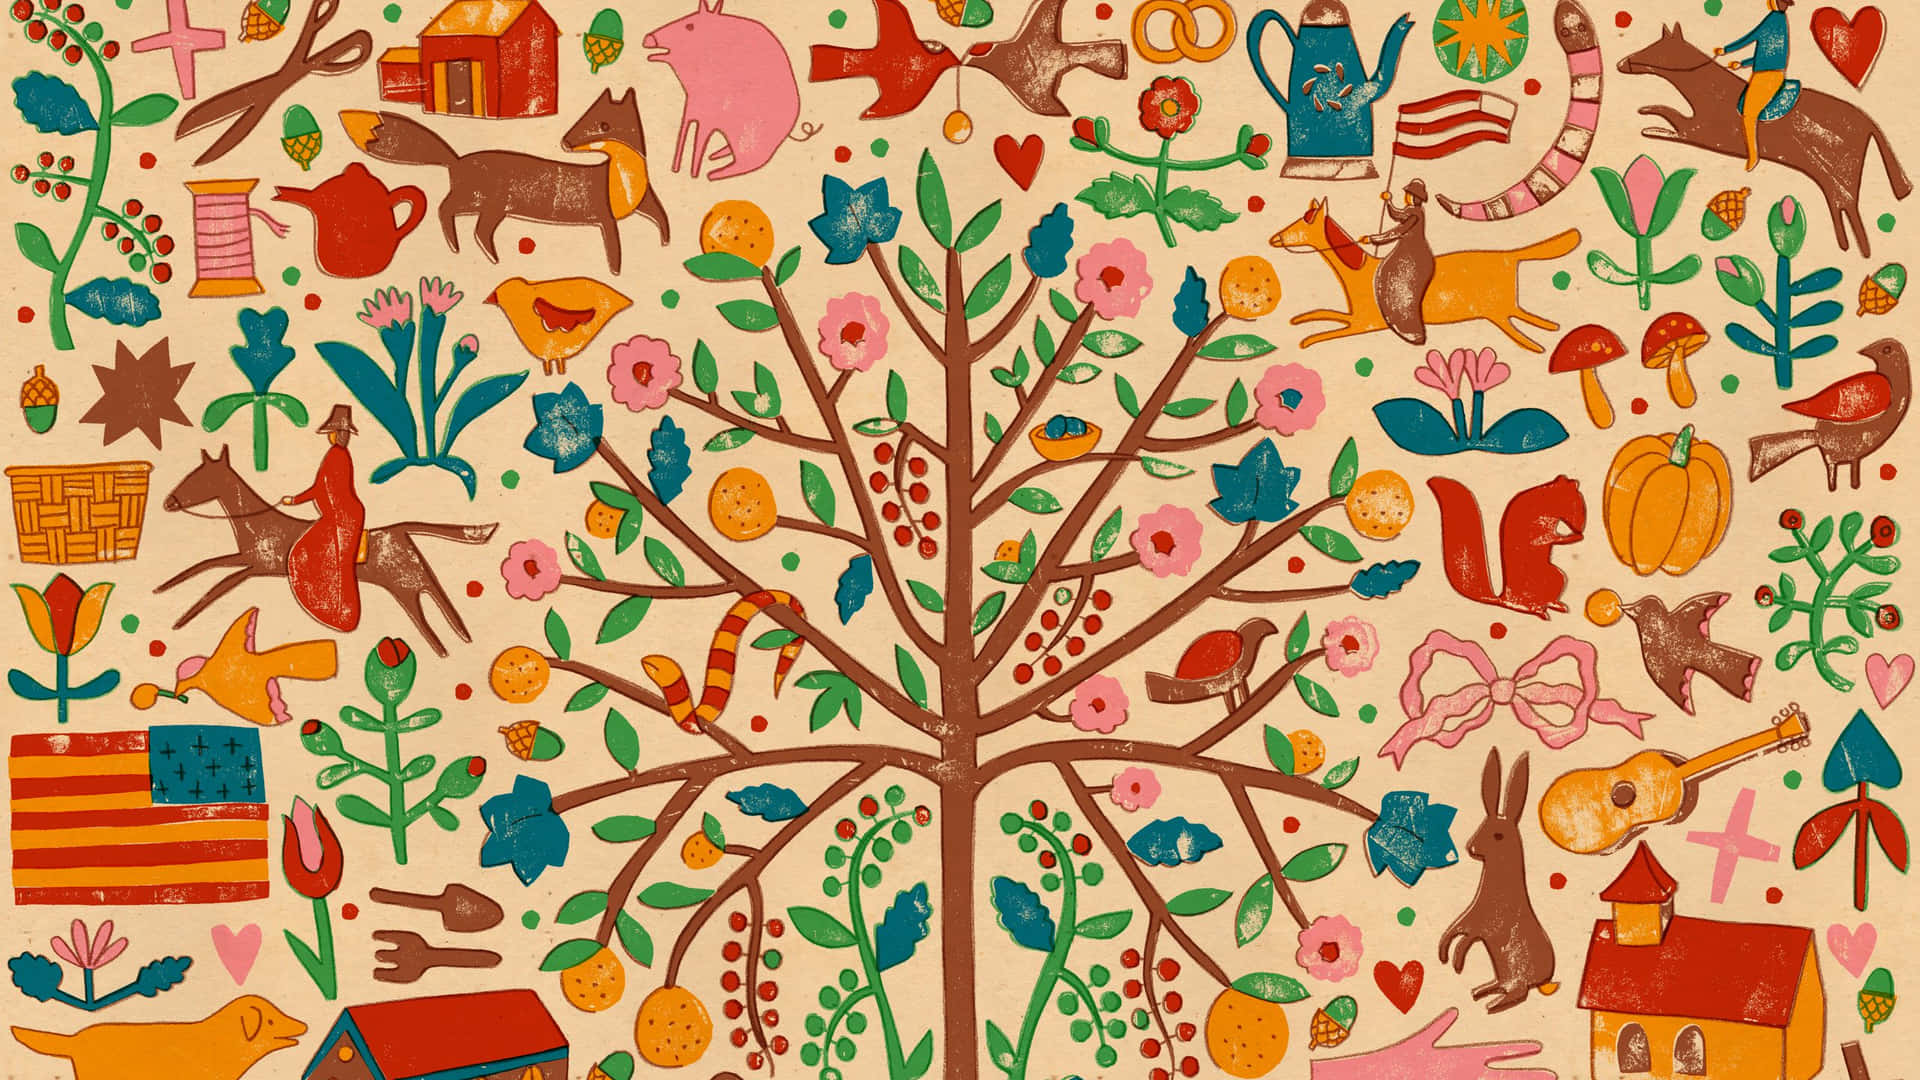 A Colorful Illustration Of A Tree With Animals And Other Objects